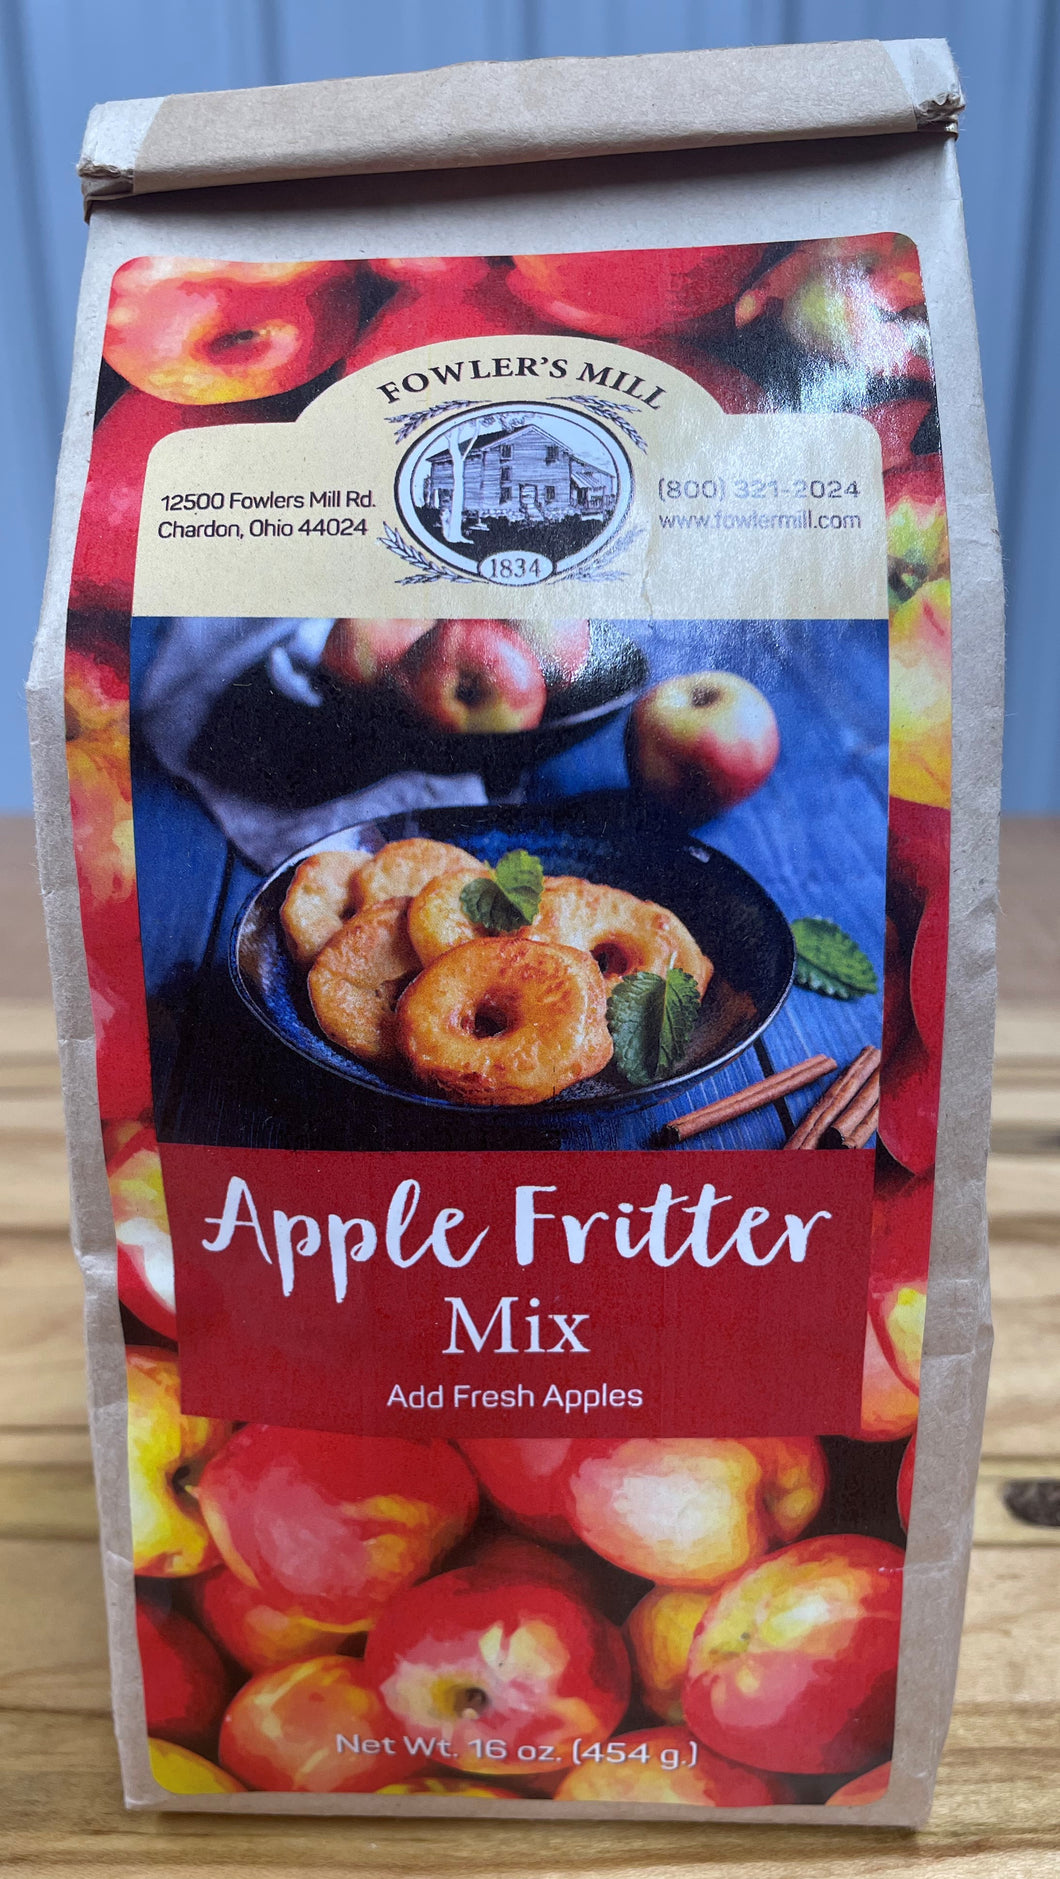 Fowler's Mill Apple Fritter Mix